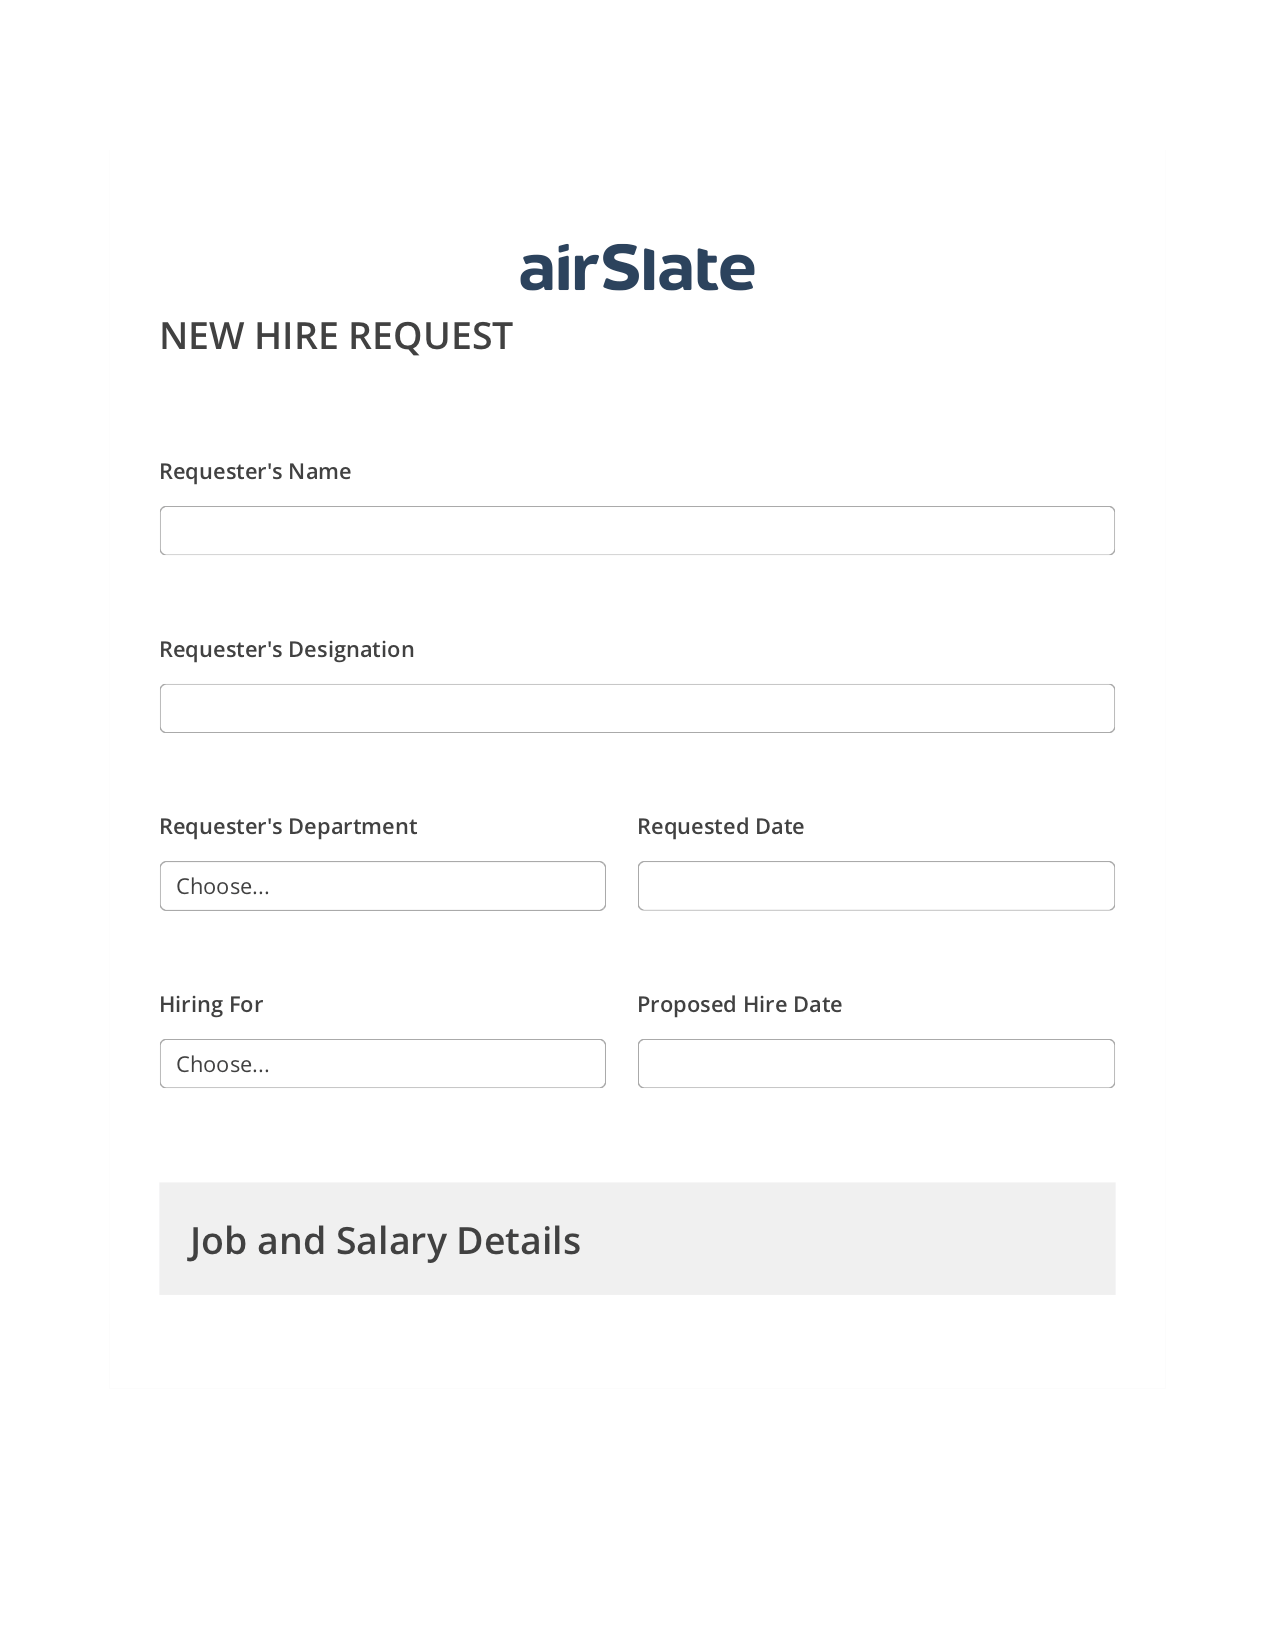 Multirole Hiring Request Workflow Pre-fill from Office 365 Excel Bot, Lock the Slate Bot, Archive to SharePoint Folder Bot